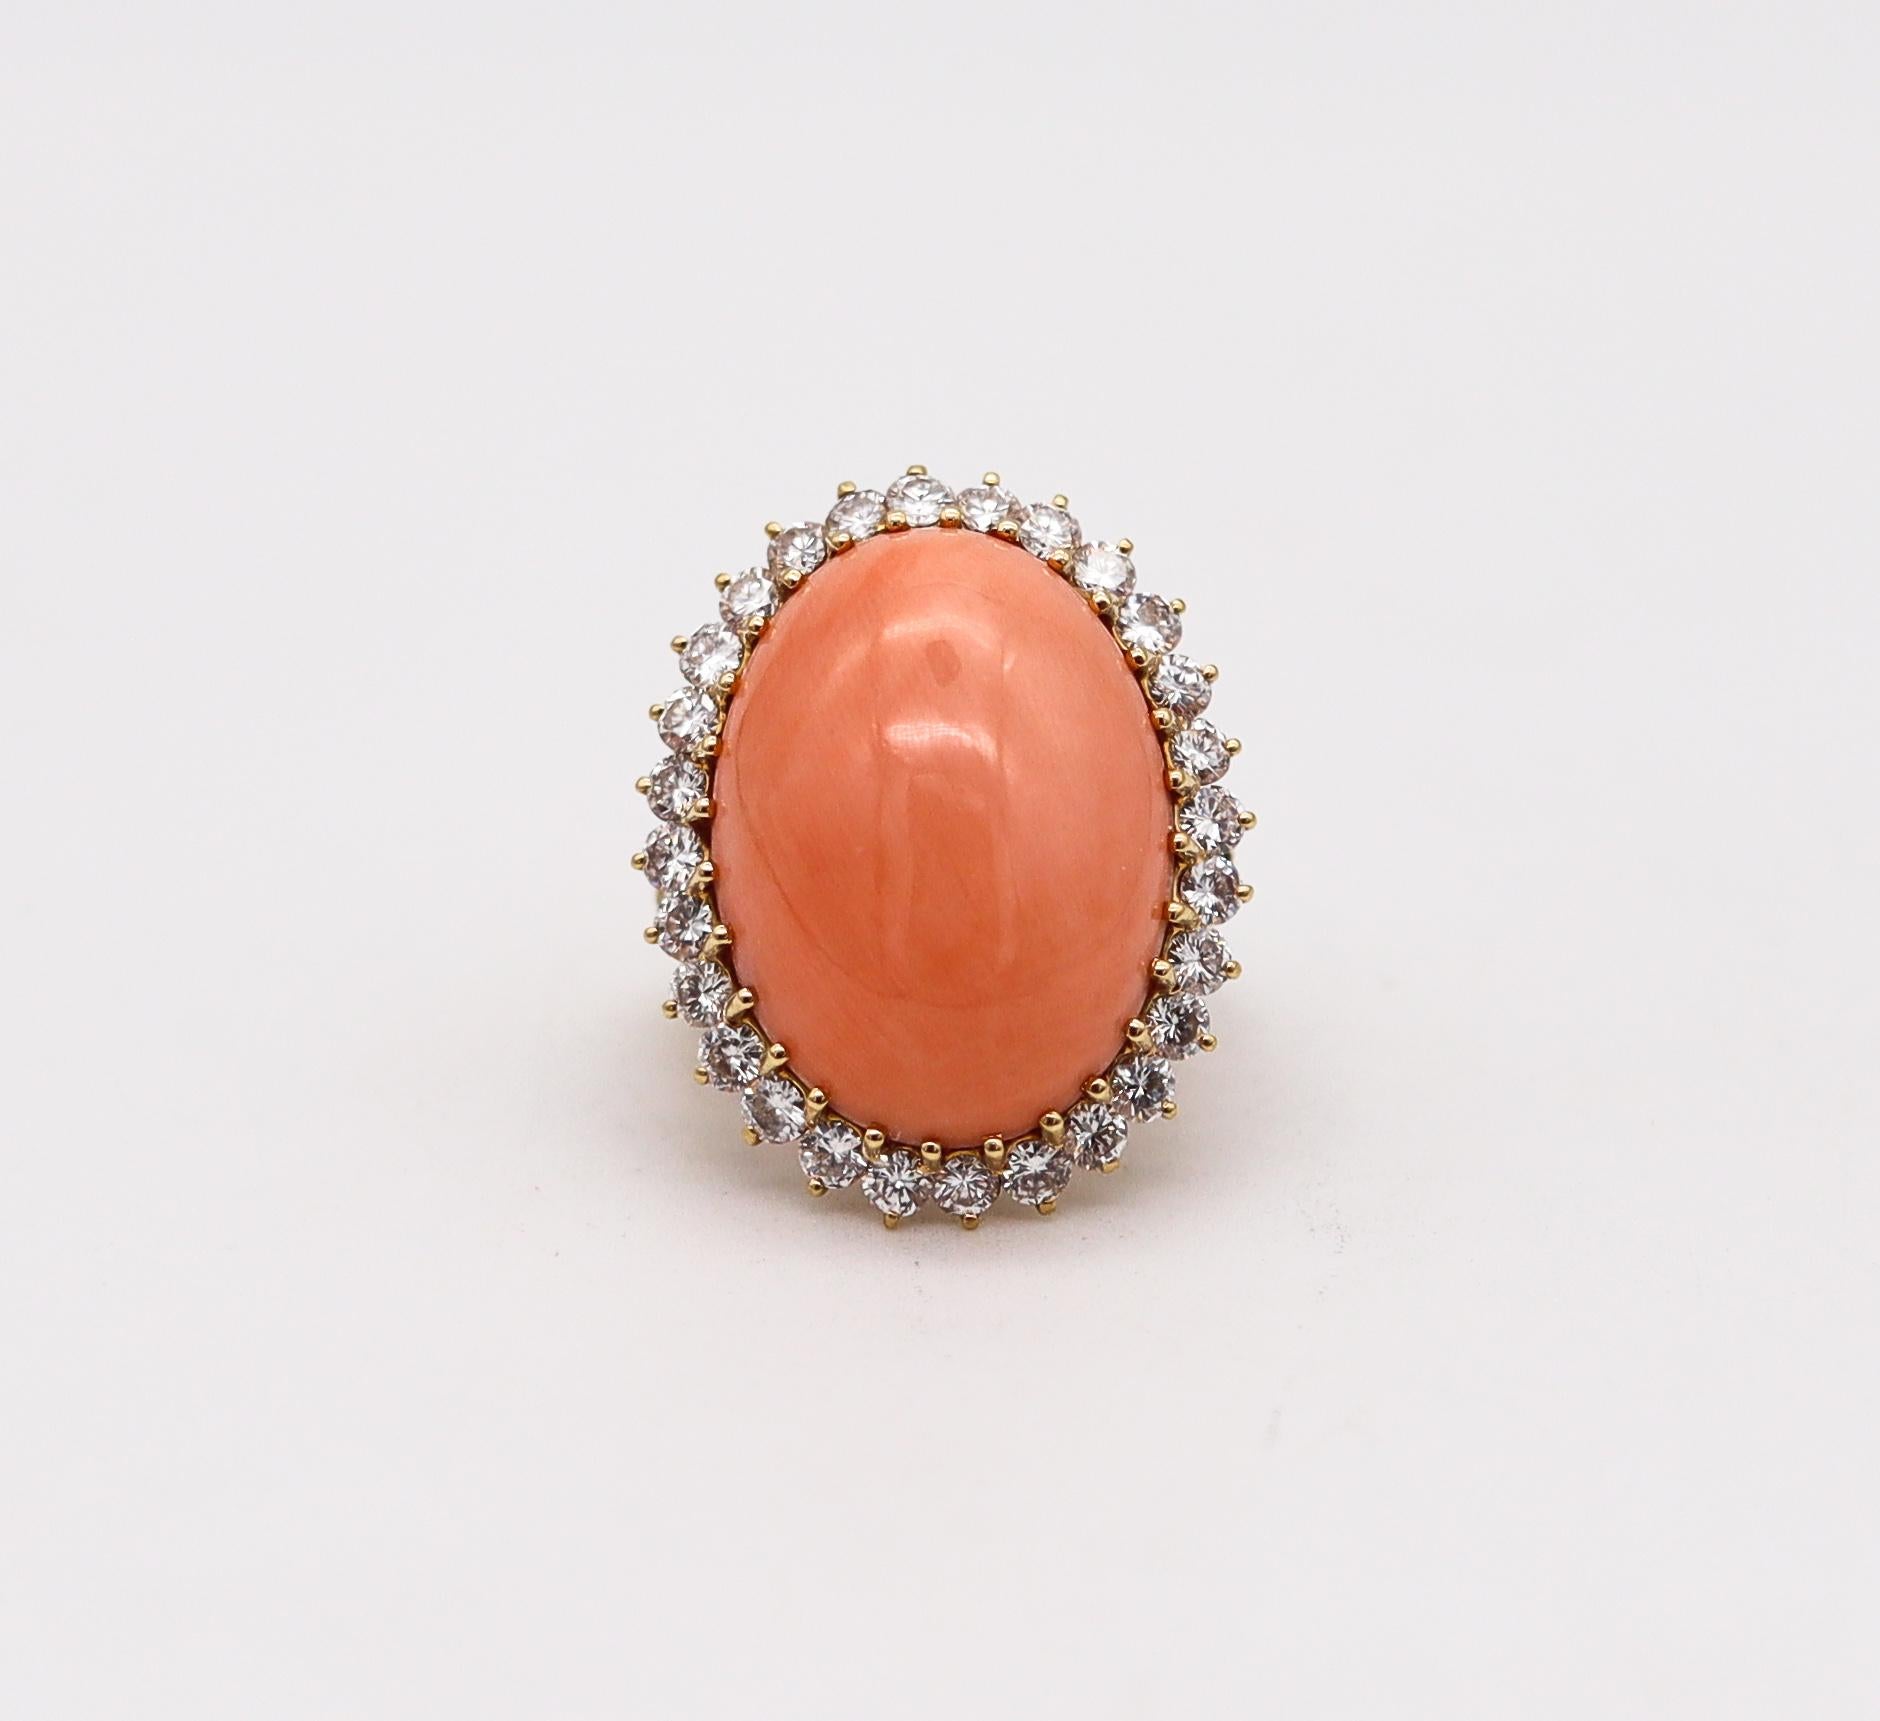 Modernist Mauboussin 1970 Paris Coral Cocktail Ring 18Kt Gold 28.66 Ctw Diamonds And Coral